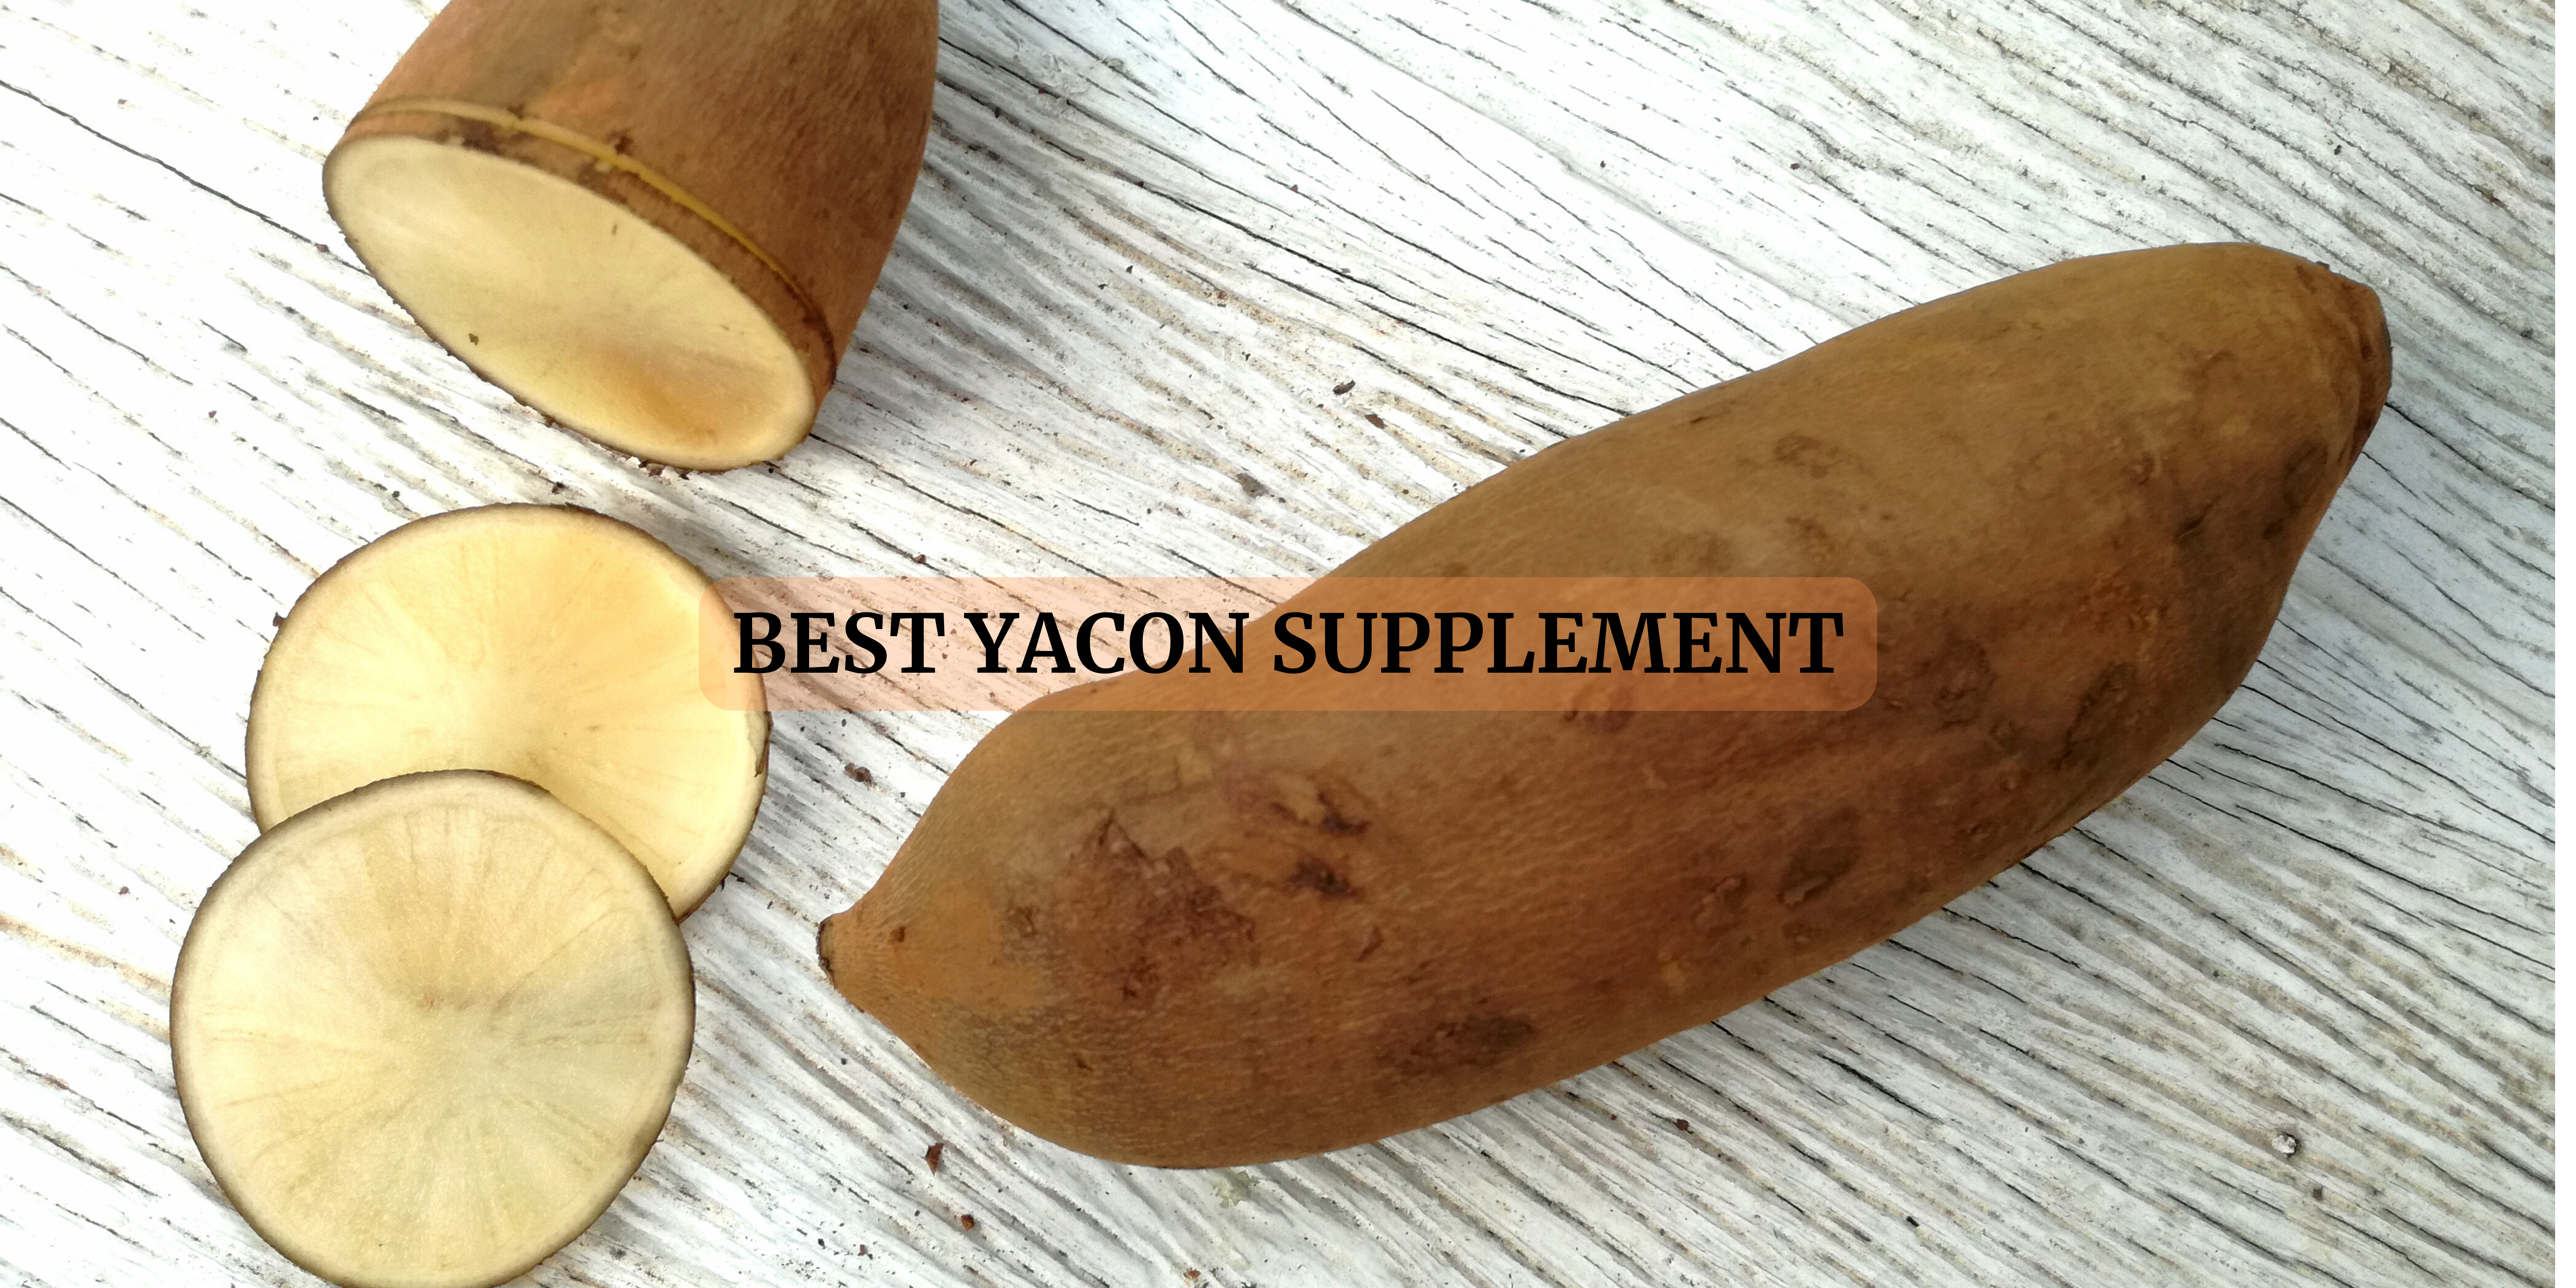 Yacon Supplements in USA